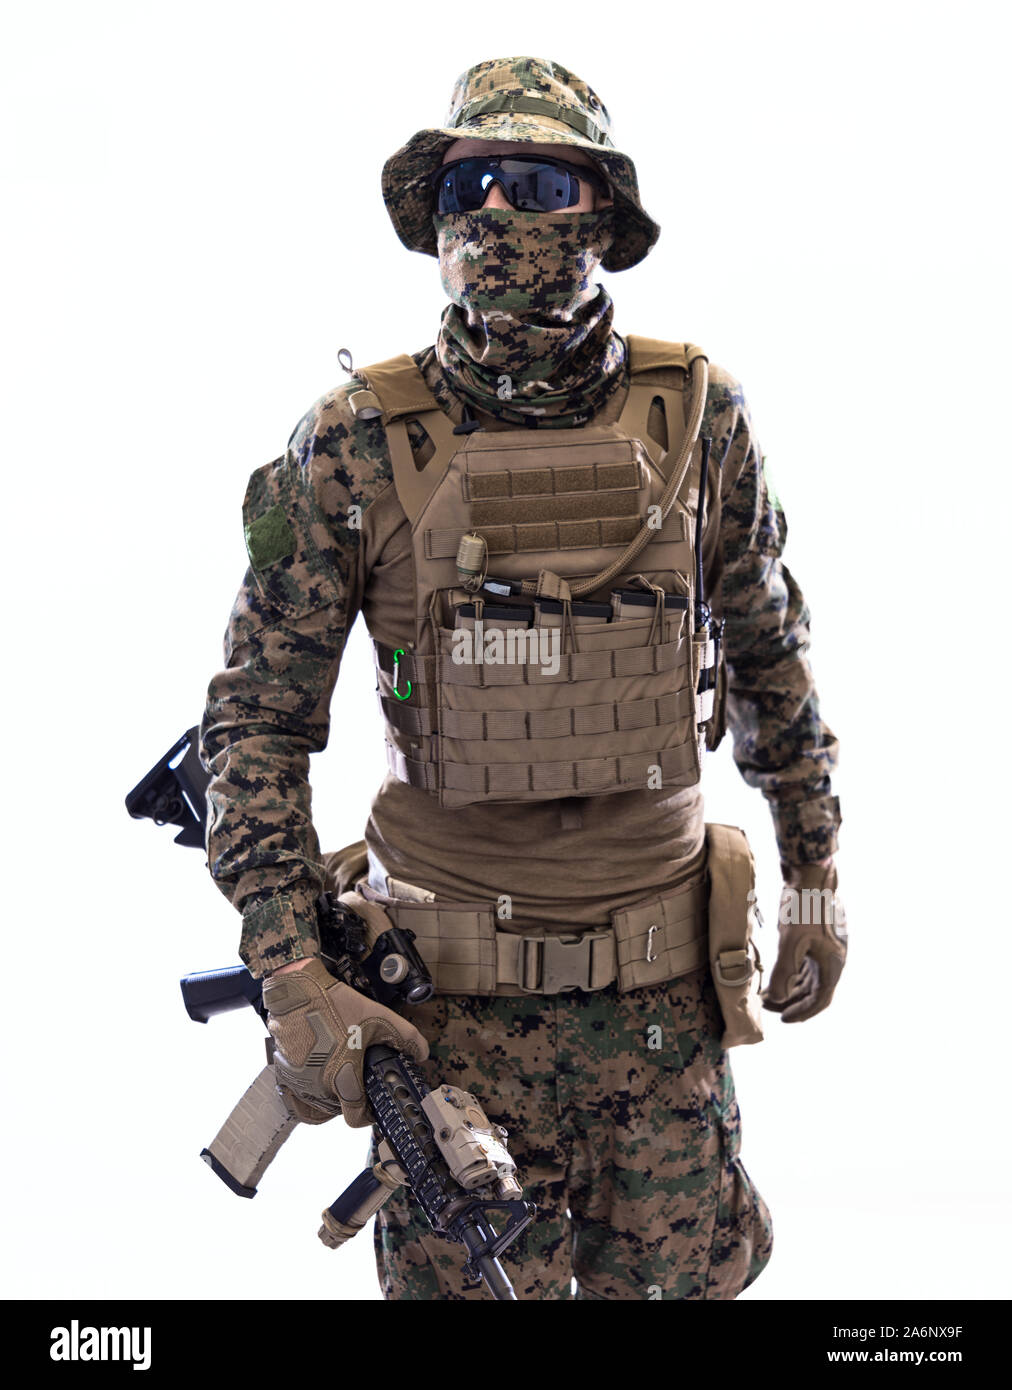 american marine corps special operations soldier with fire arm